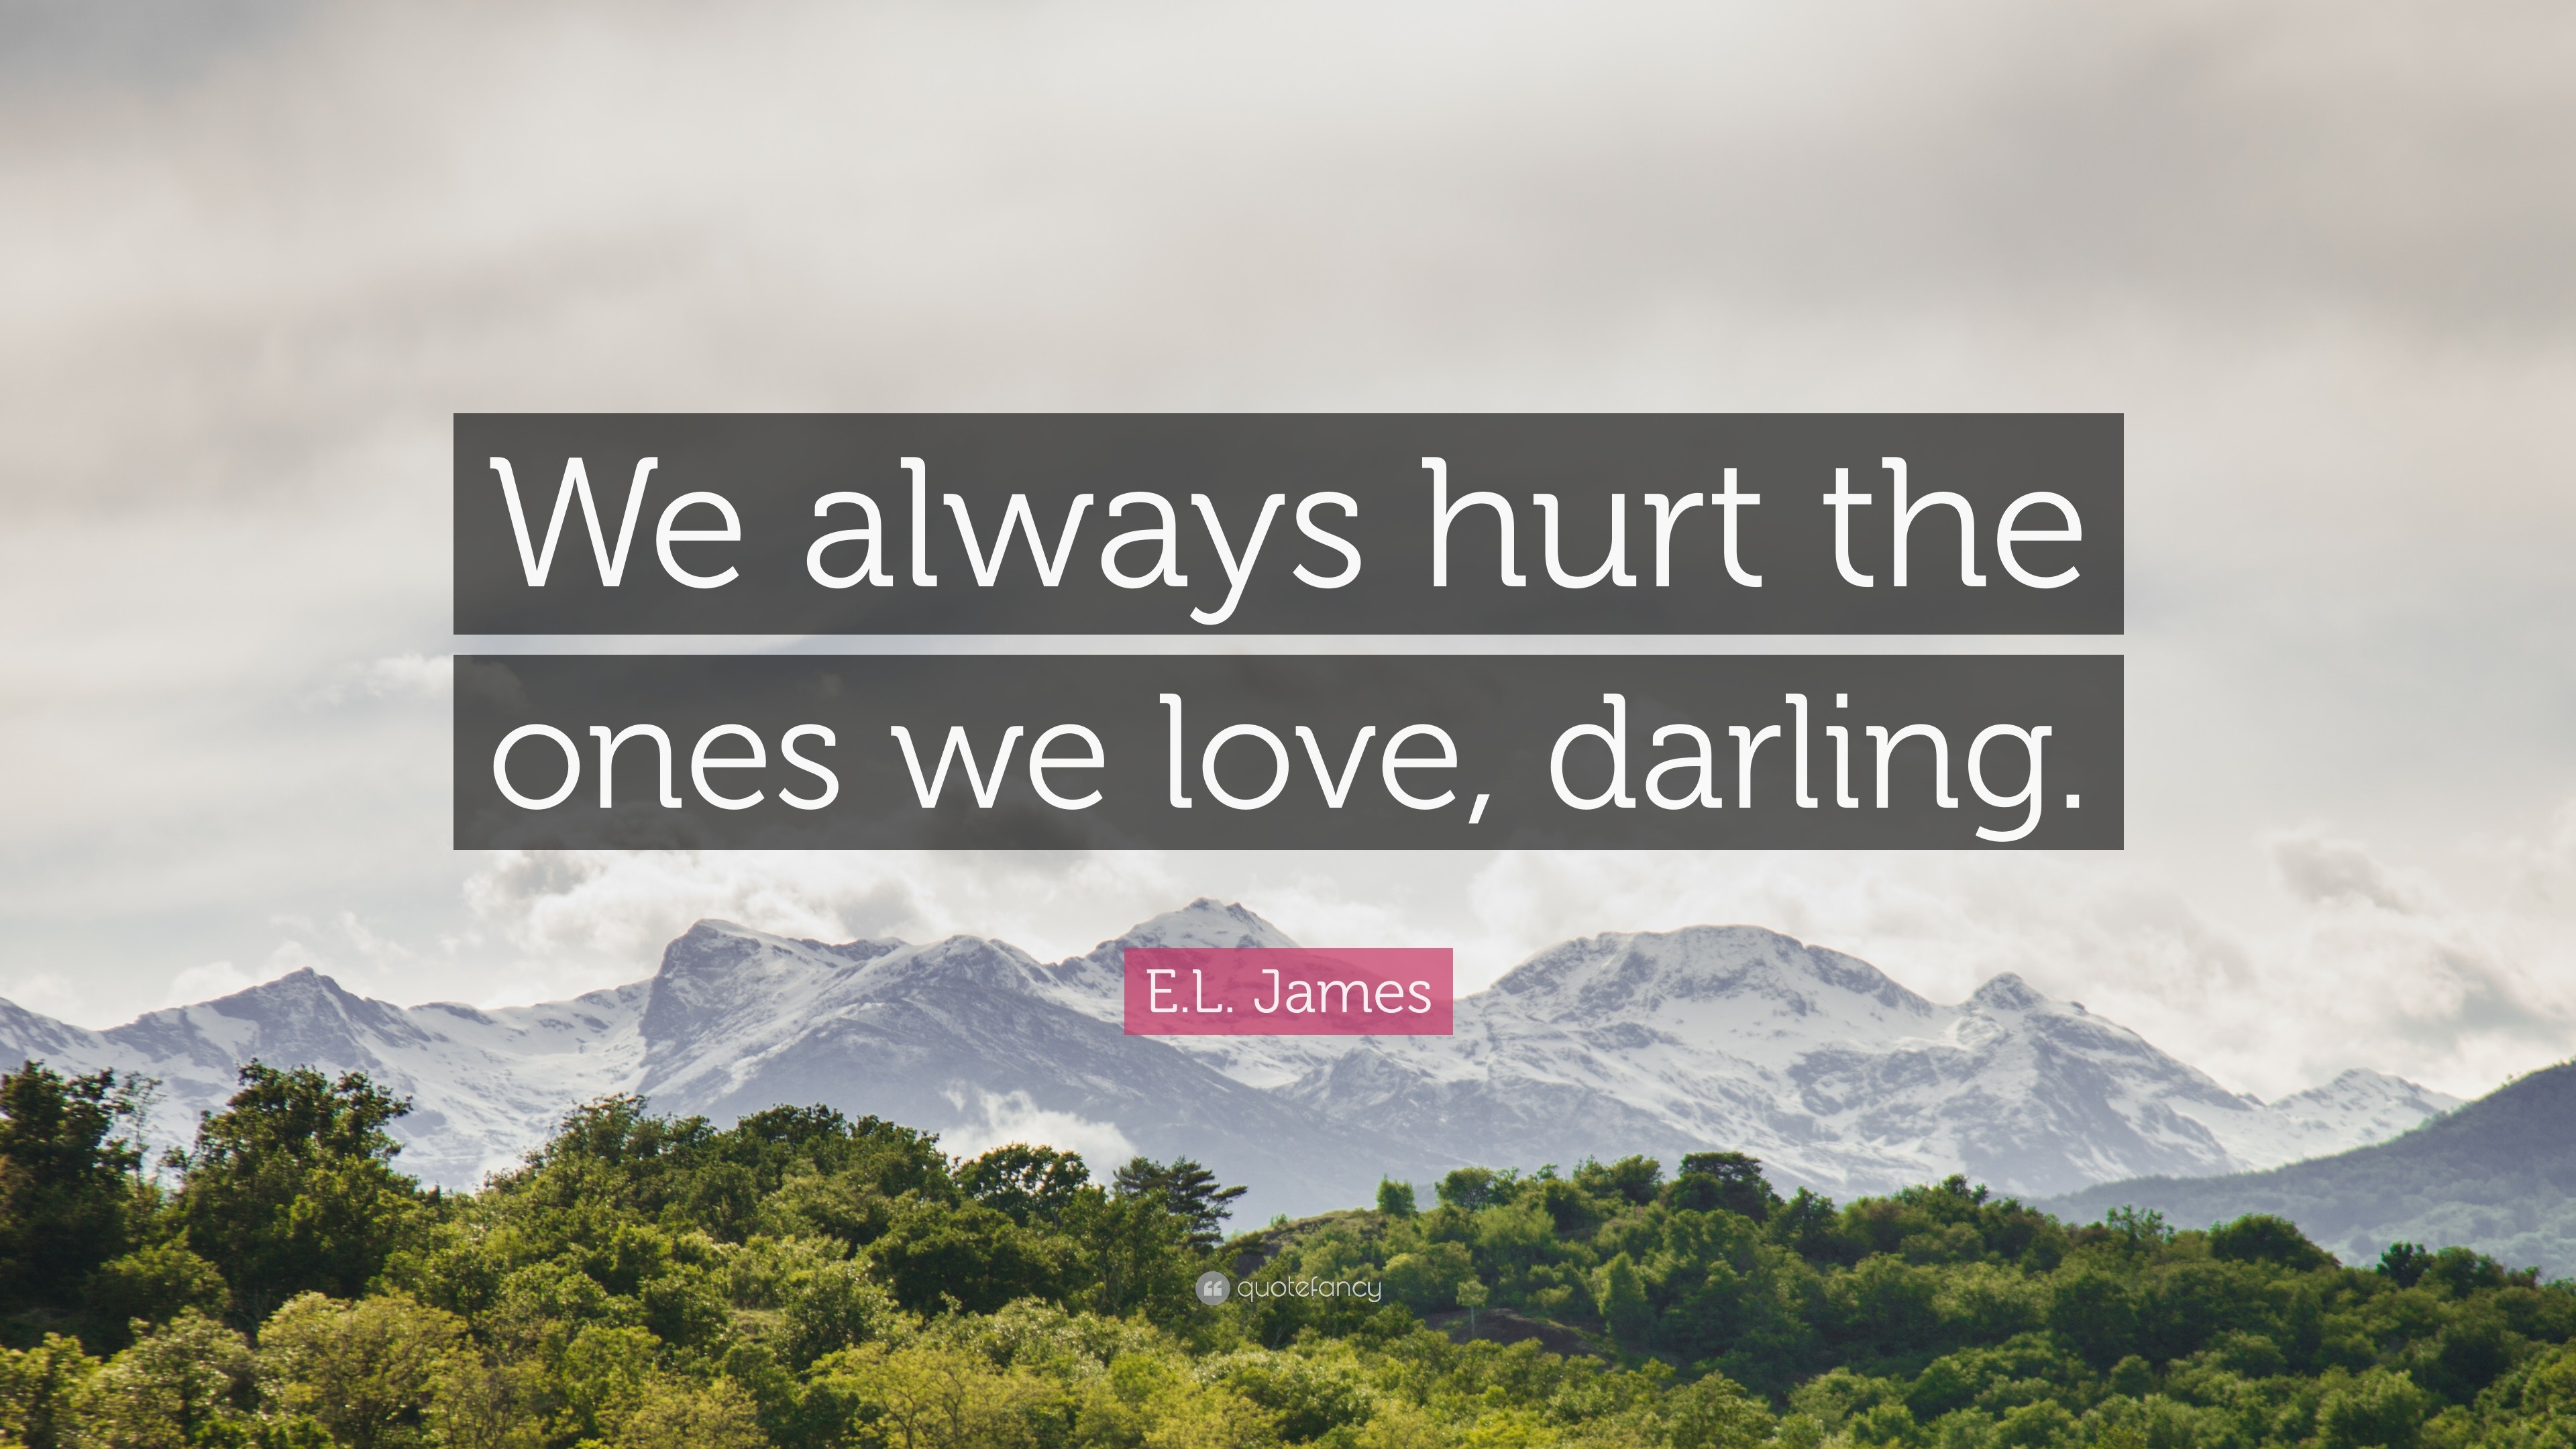 E L James Quote “We always hurt the ones we love darling ”